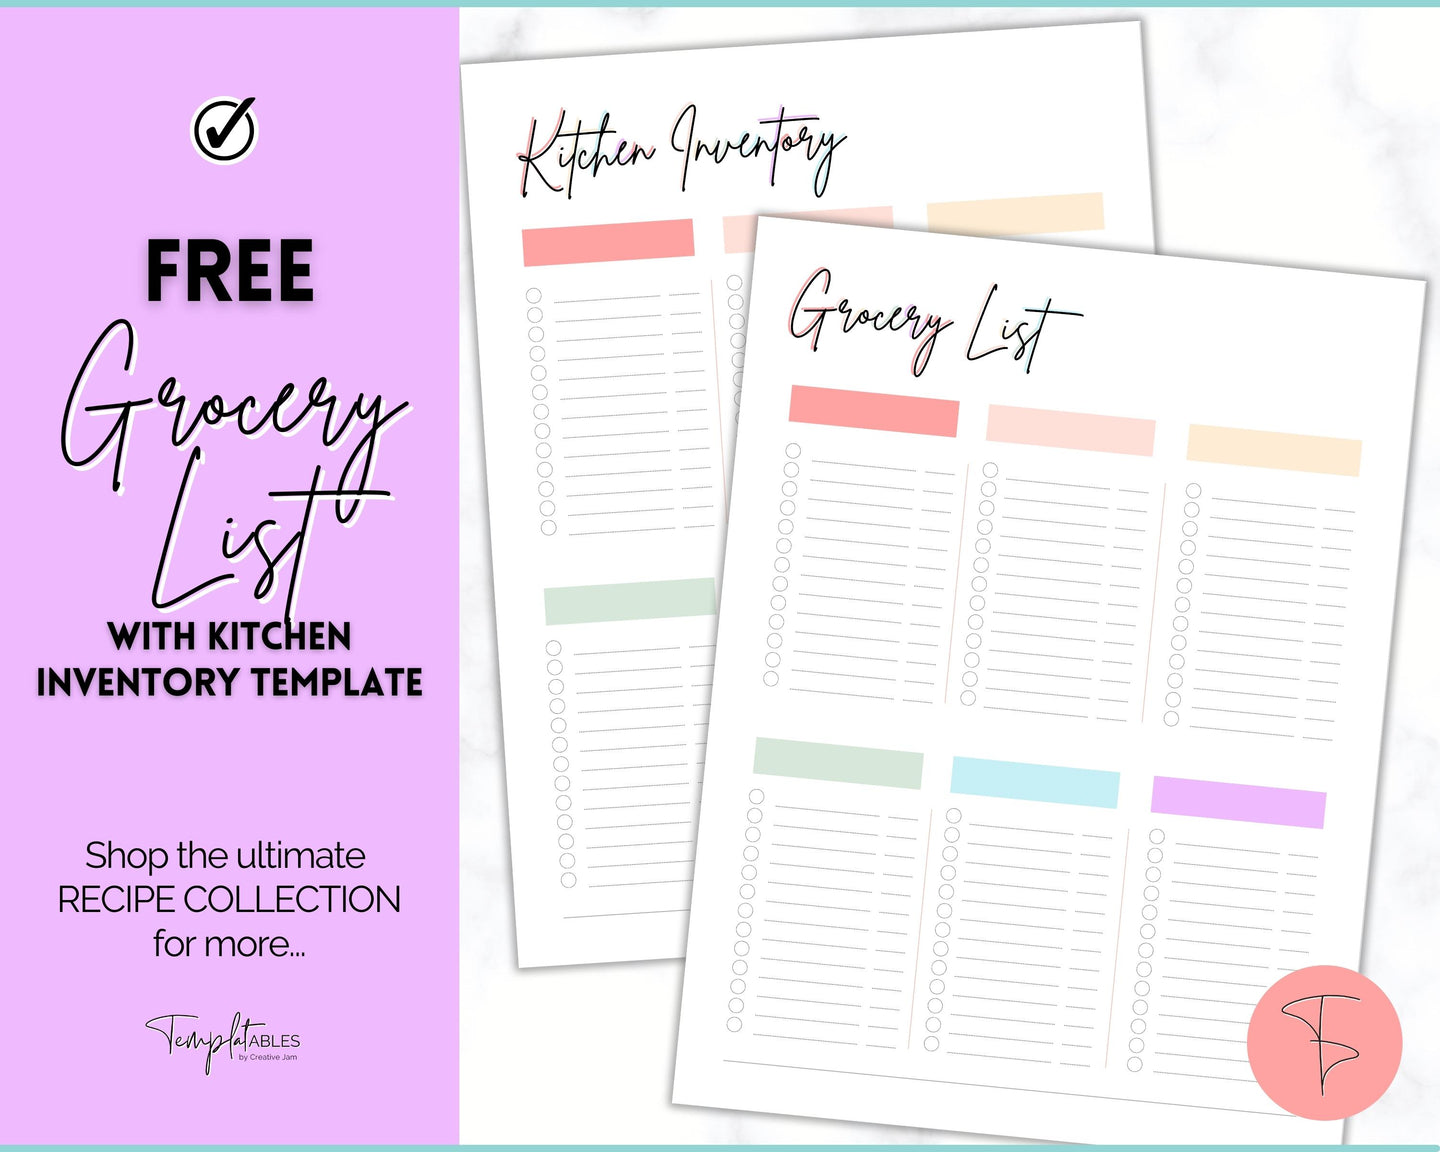 FREE - Grocery List Printable, Weekly Shopping List, Meal Planner Checklist, Kitchen Organization Template | Pastel Rainbow